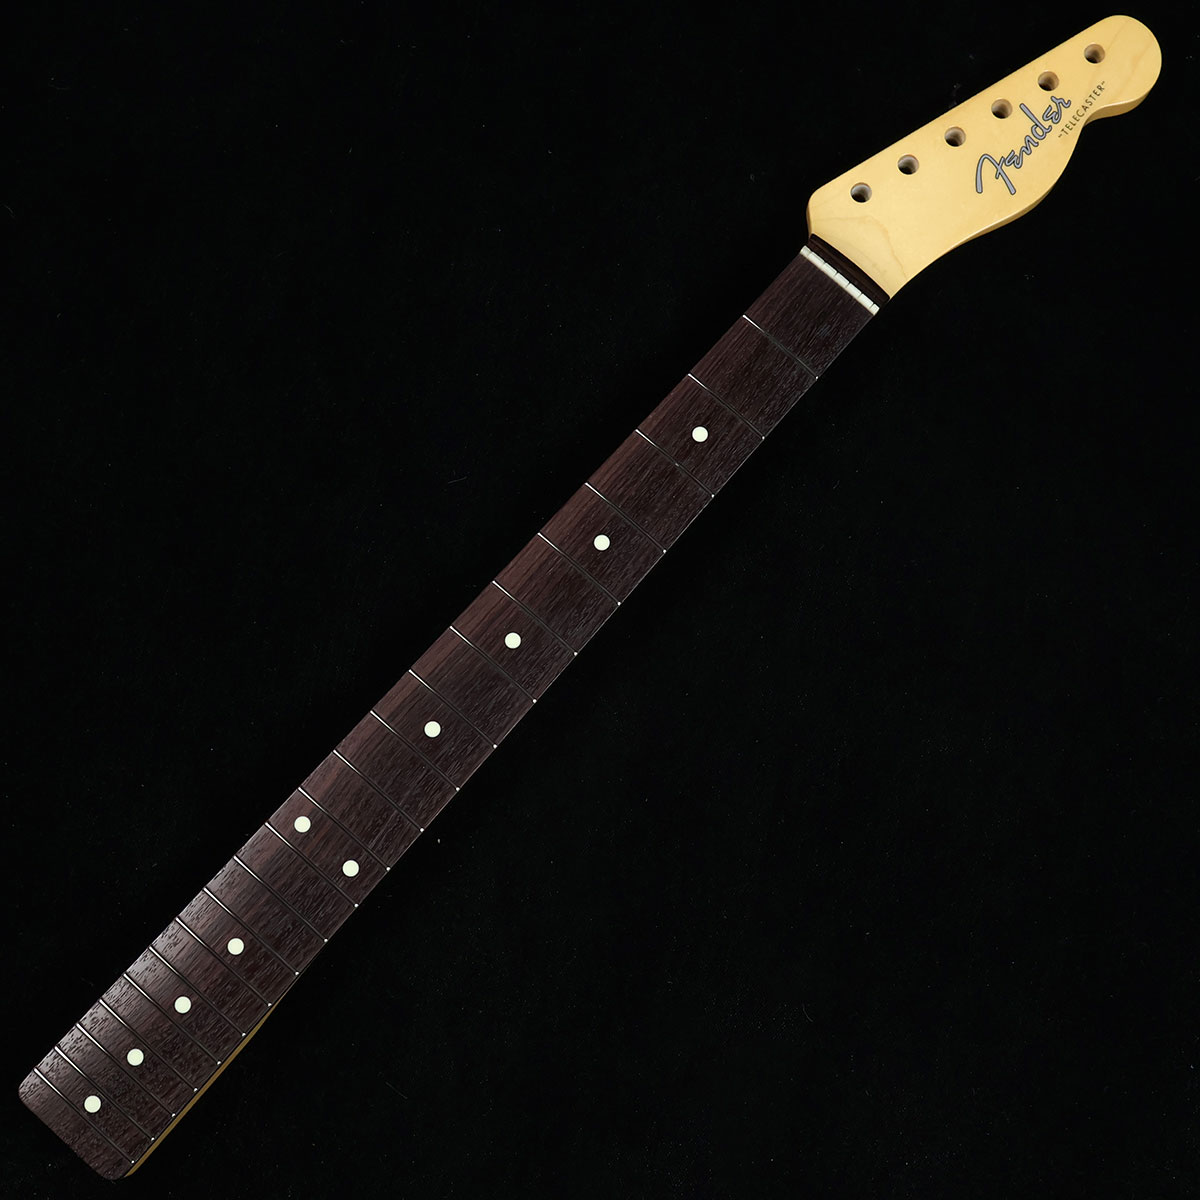 Fender Traditional II 60s Telecaster Neck リプレイスメントネック 